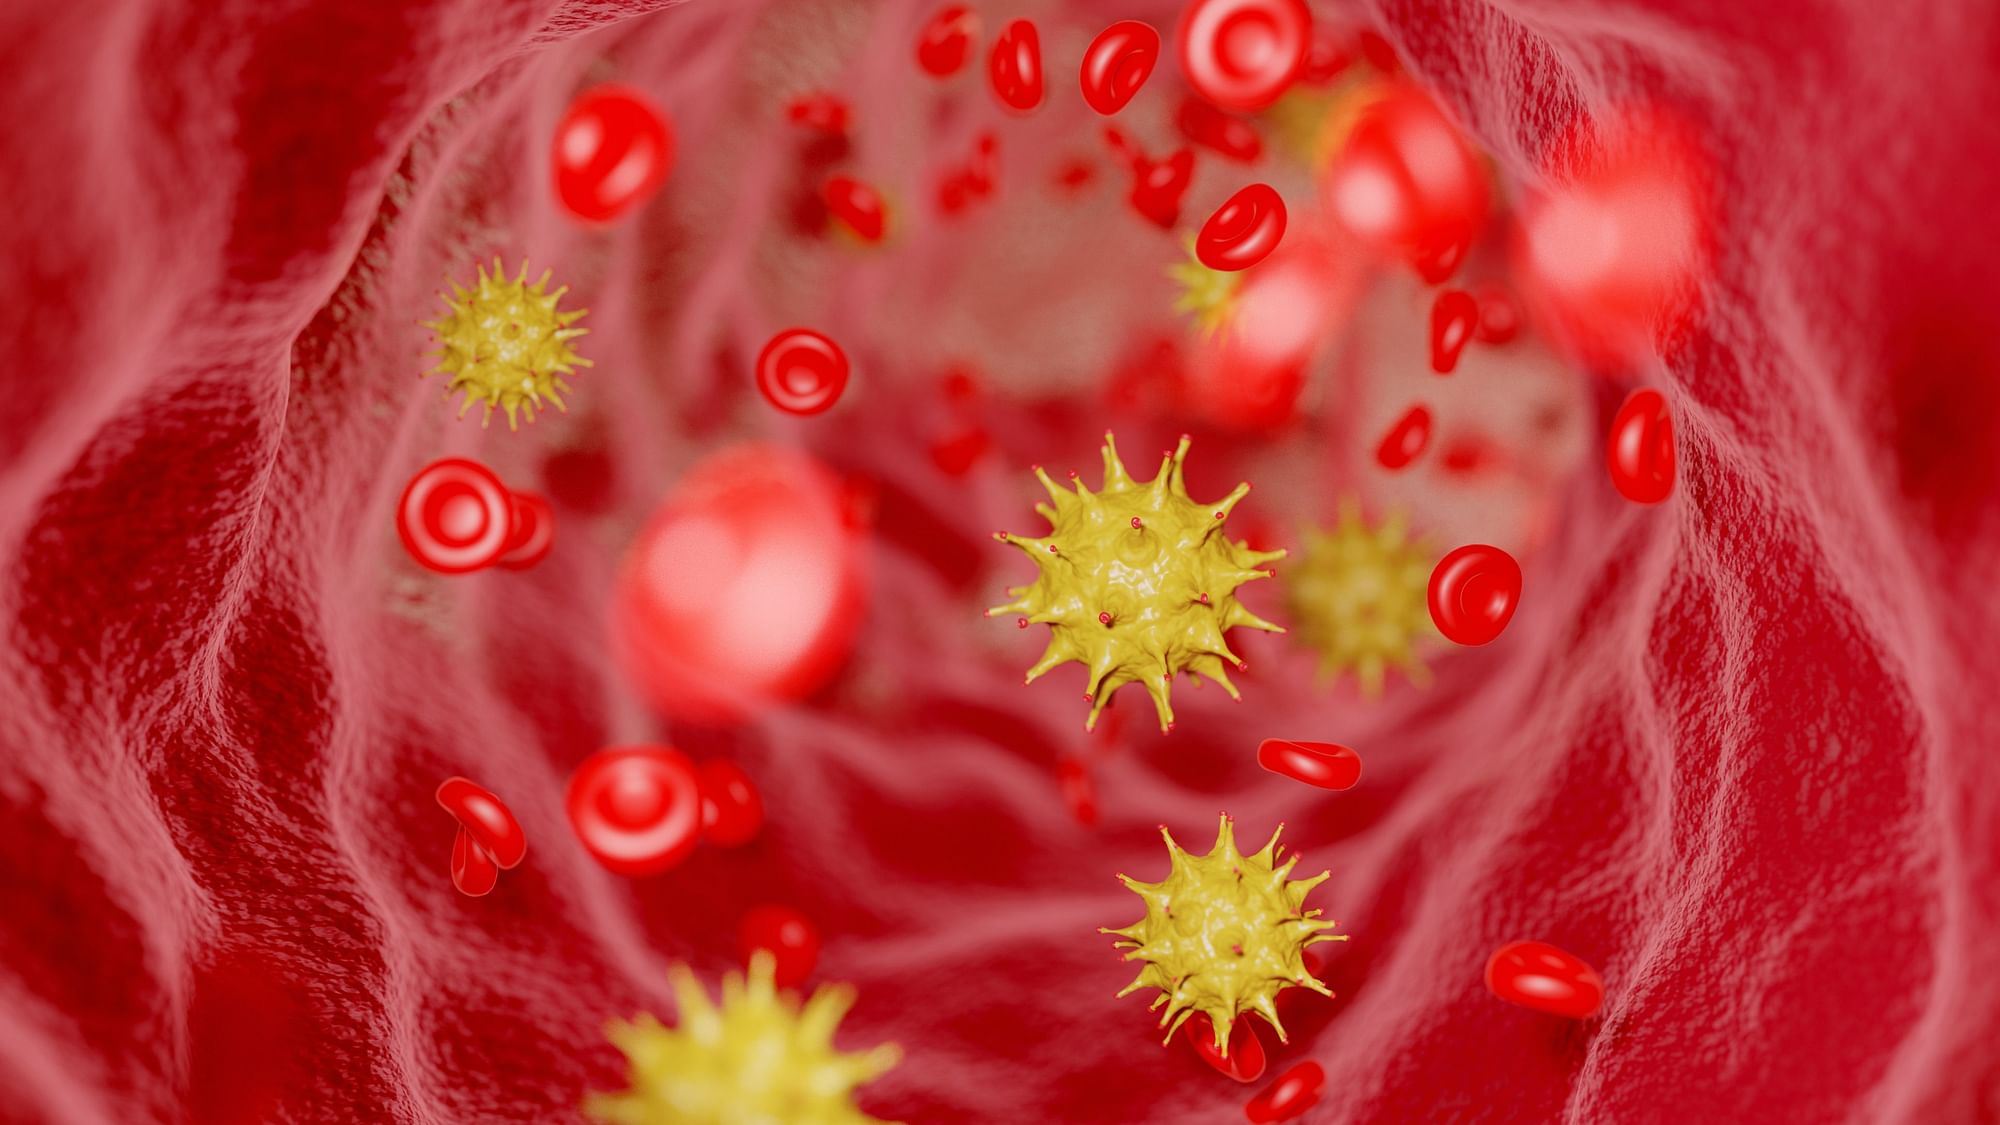 Blood plasma therapy is being touted as a way to help critical COVID-19 patients. Does it work?